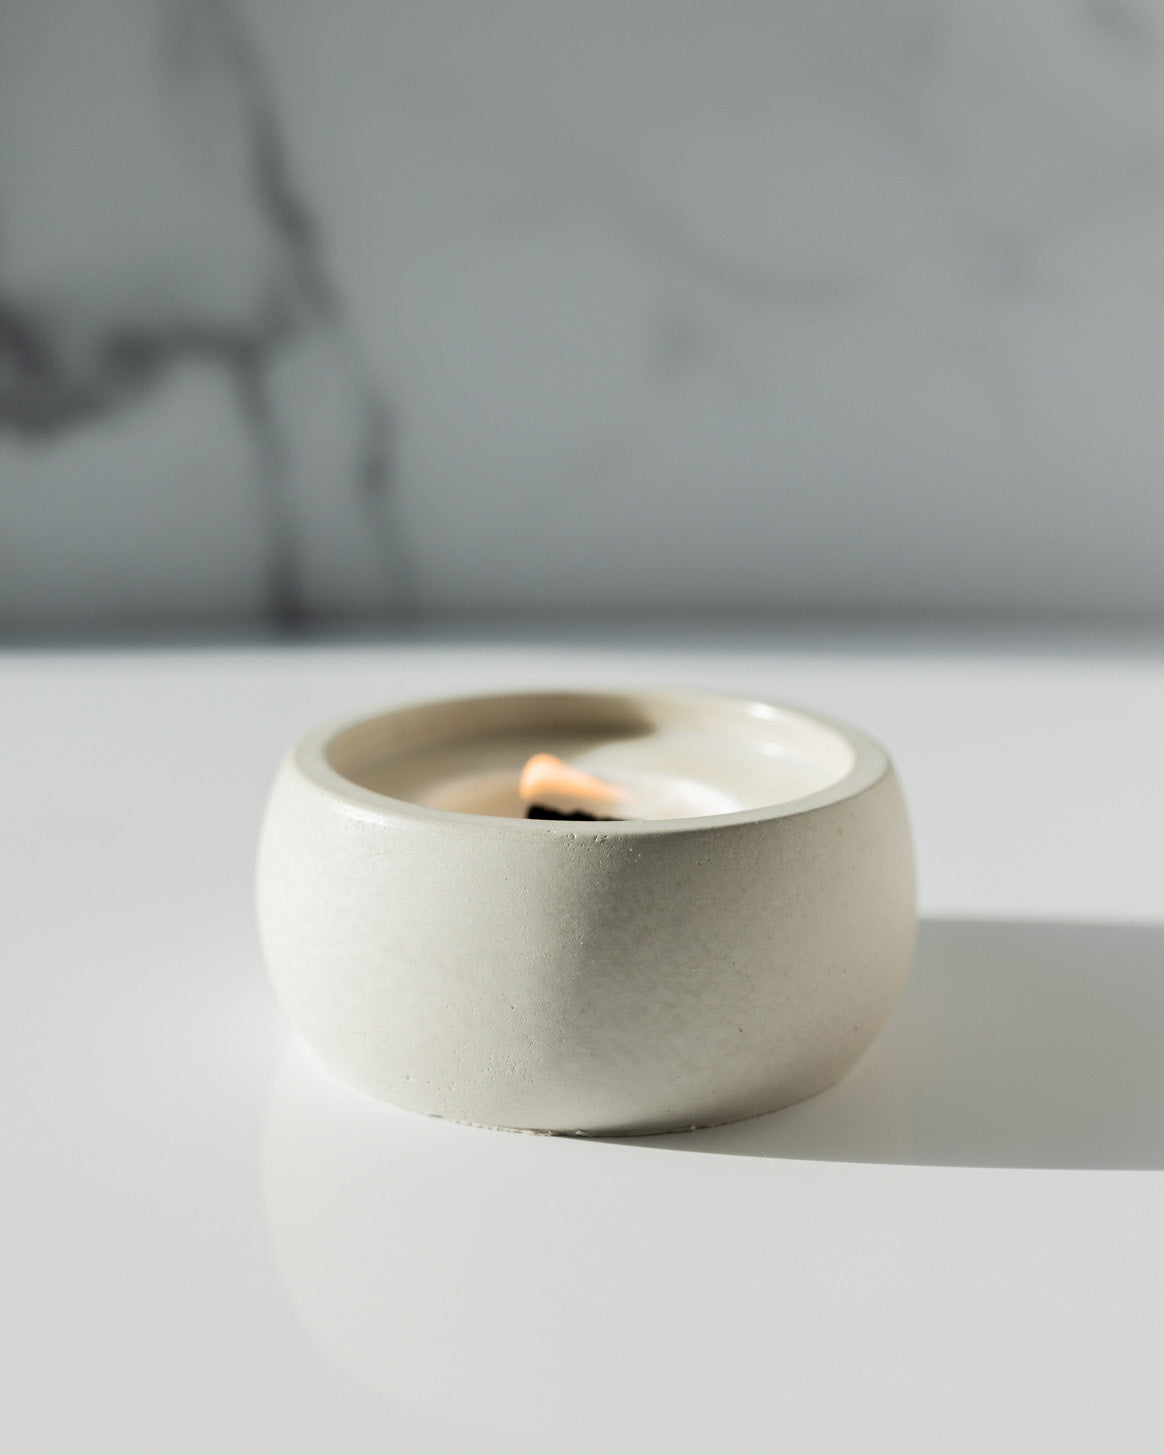 Take A Hike Coconut Soy Candle - Concrete Wooden Wick Vessel